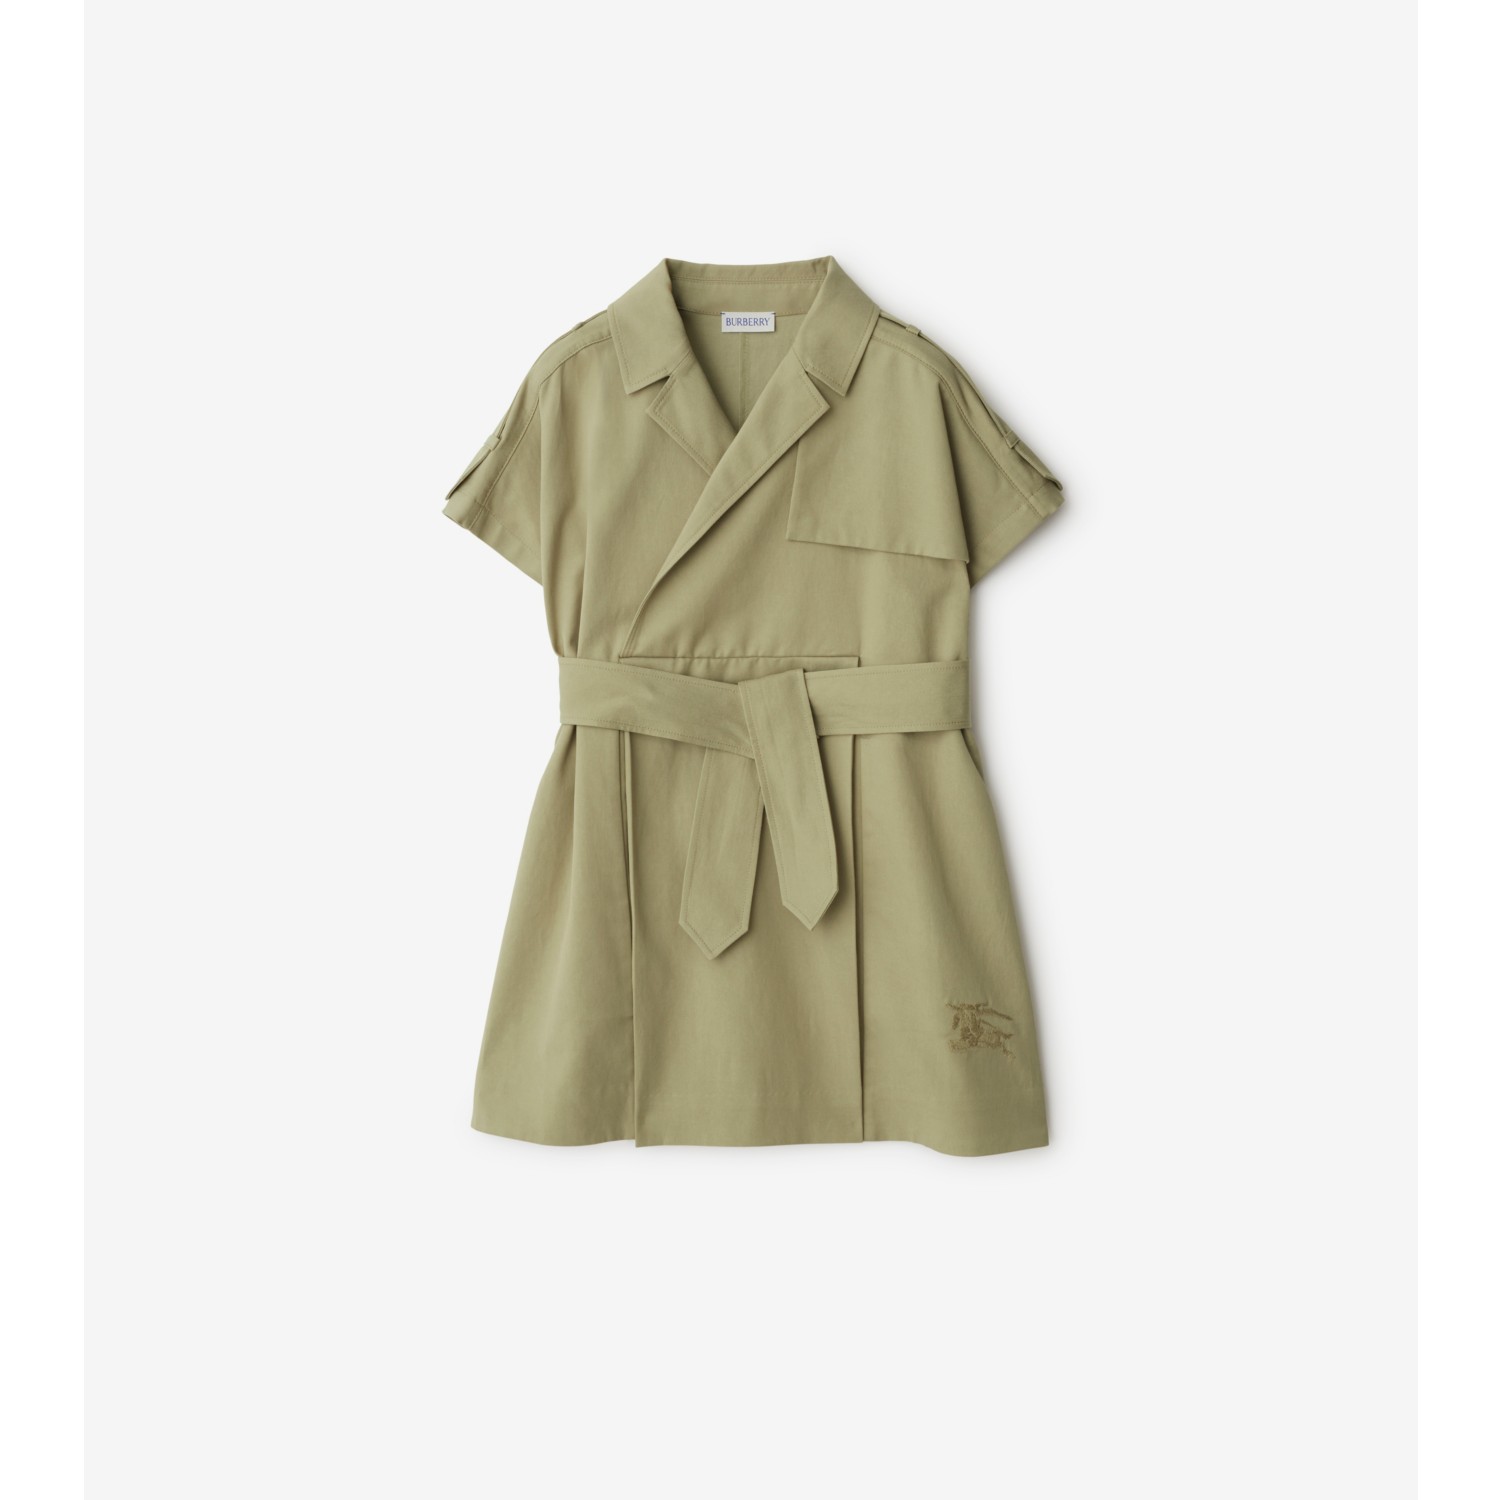 Cotton Blend Trench Dress